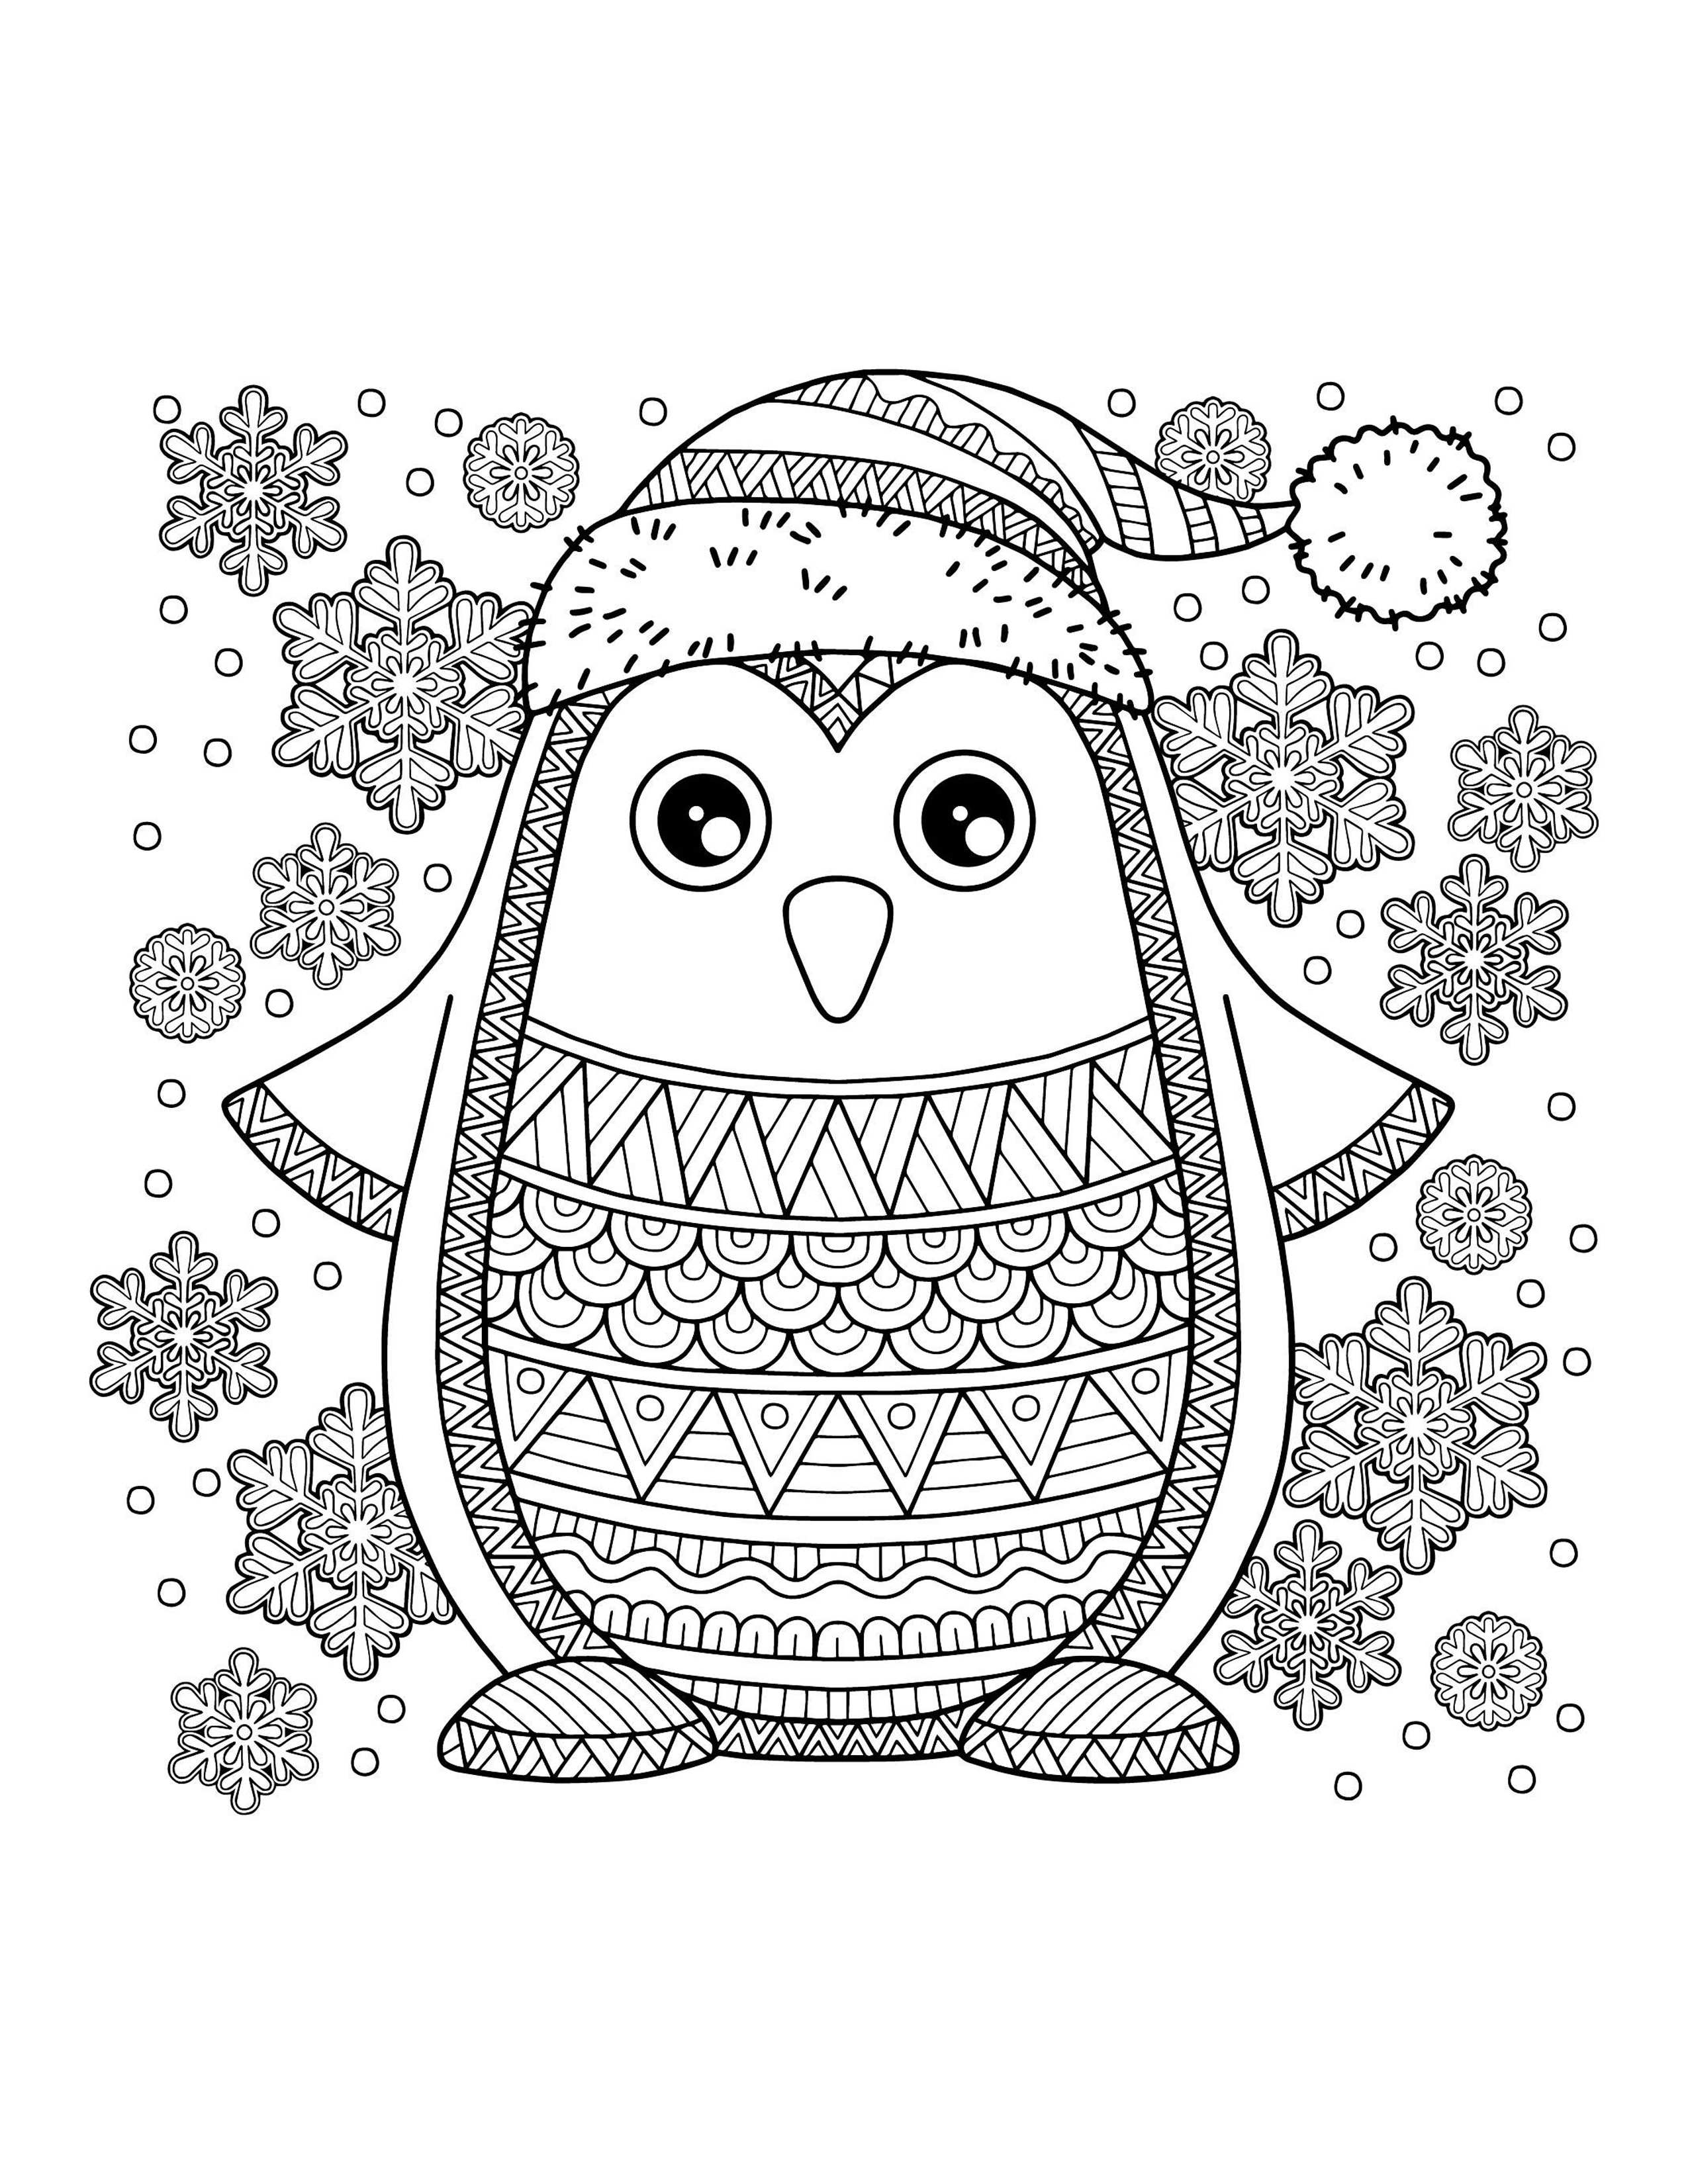 Coloring page Penguin Anti-stress penguin